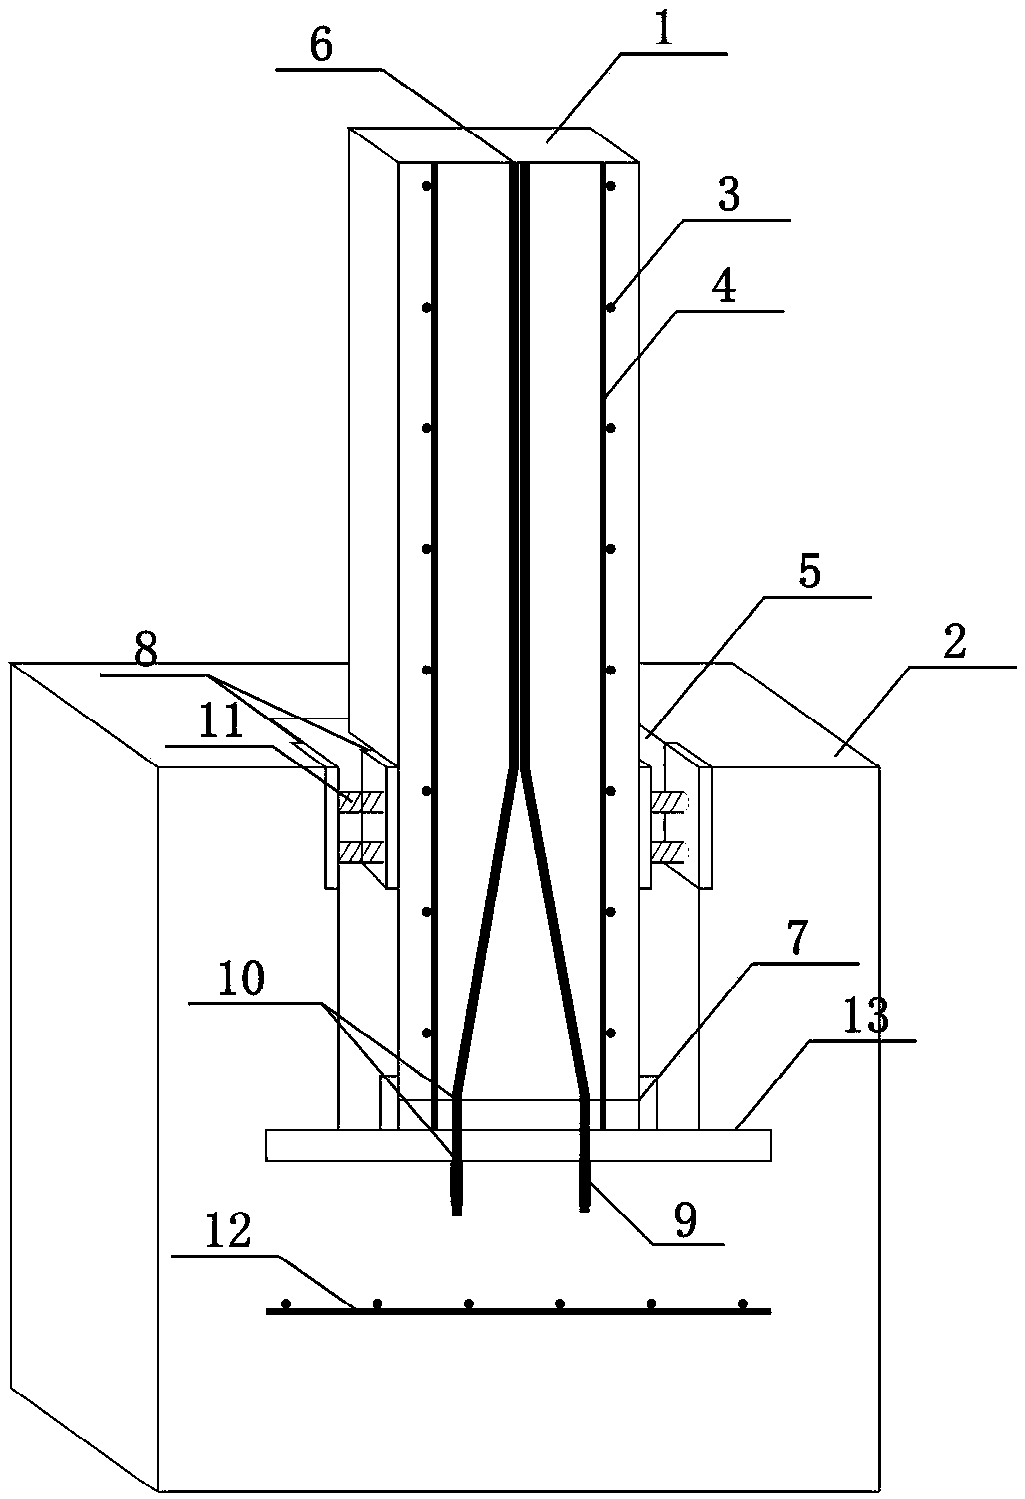 Reinforced concrete frame column with resetting function